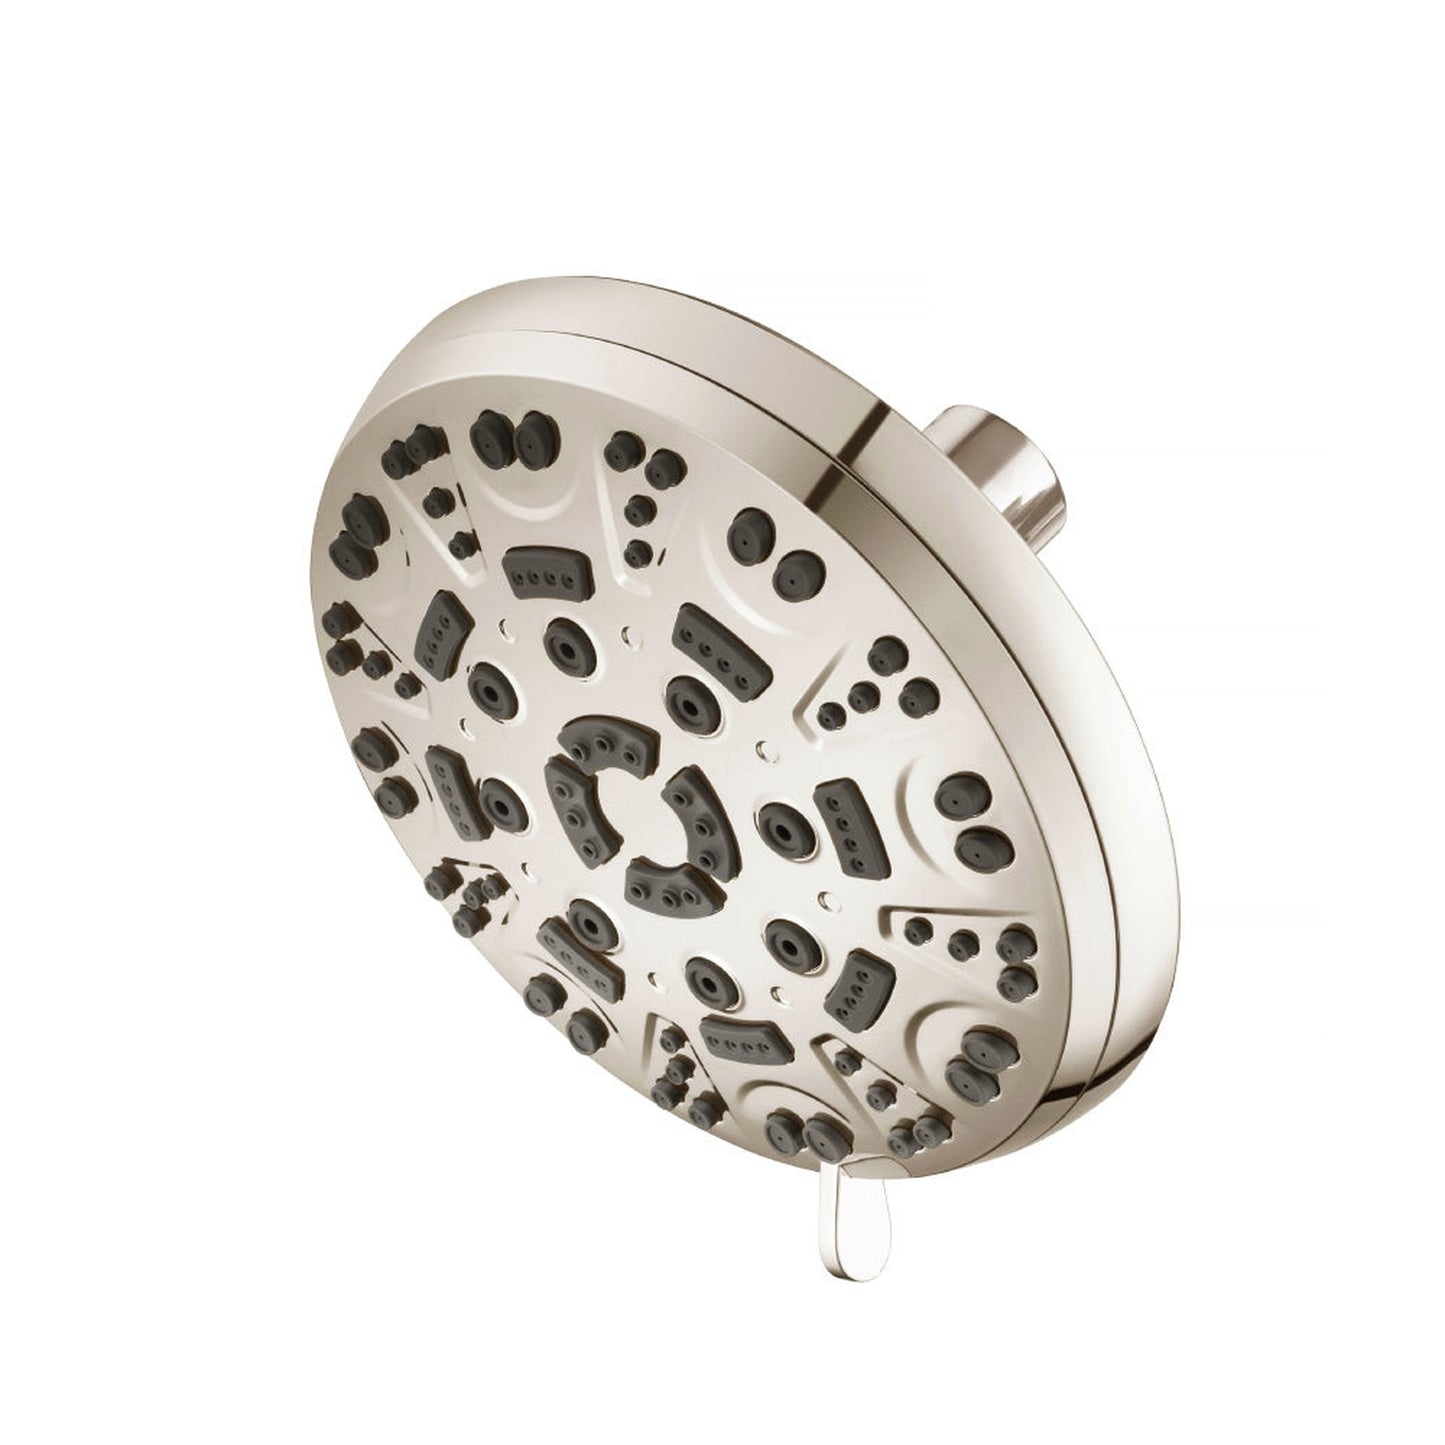 Isenberg Universal Fixtures Polished Nickel PVD 6-Function ABS Shower Head